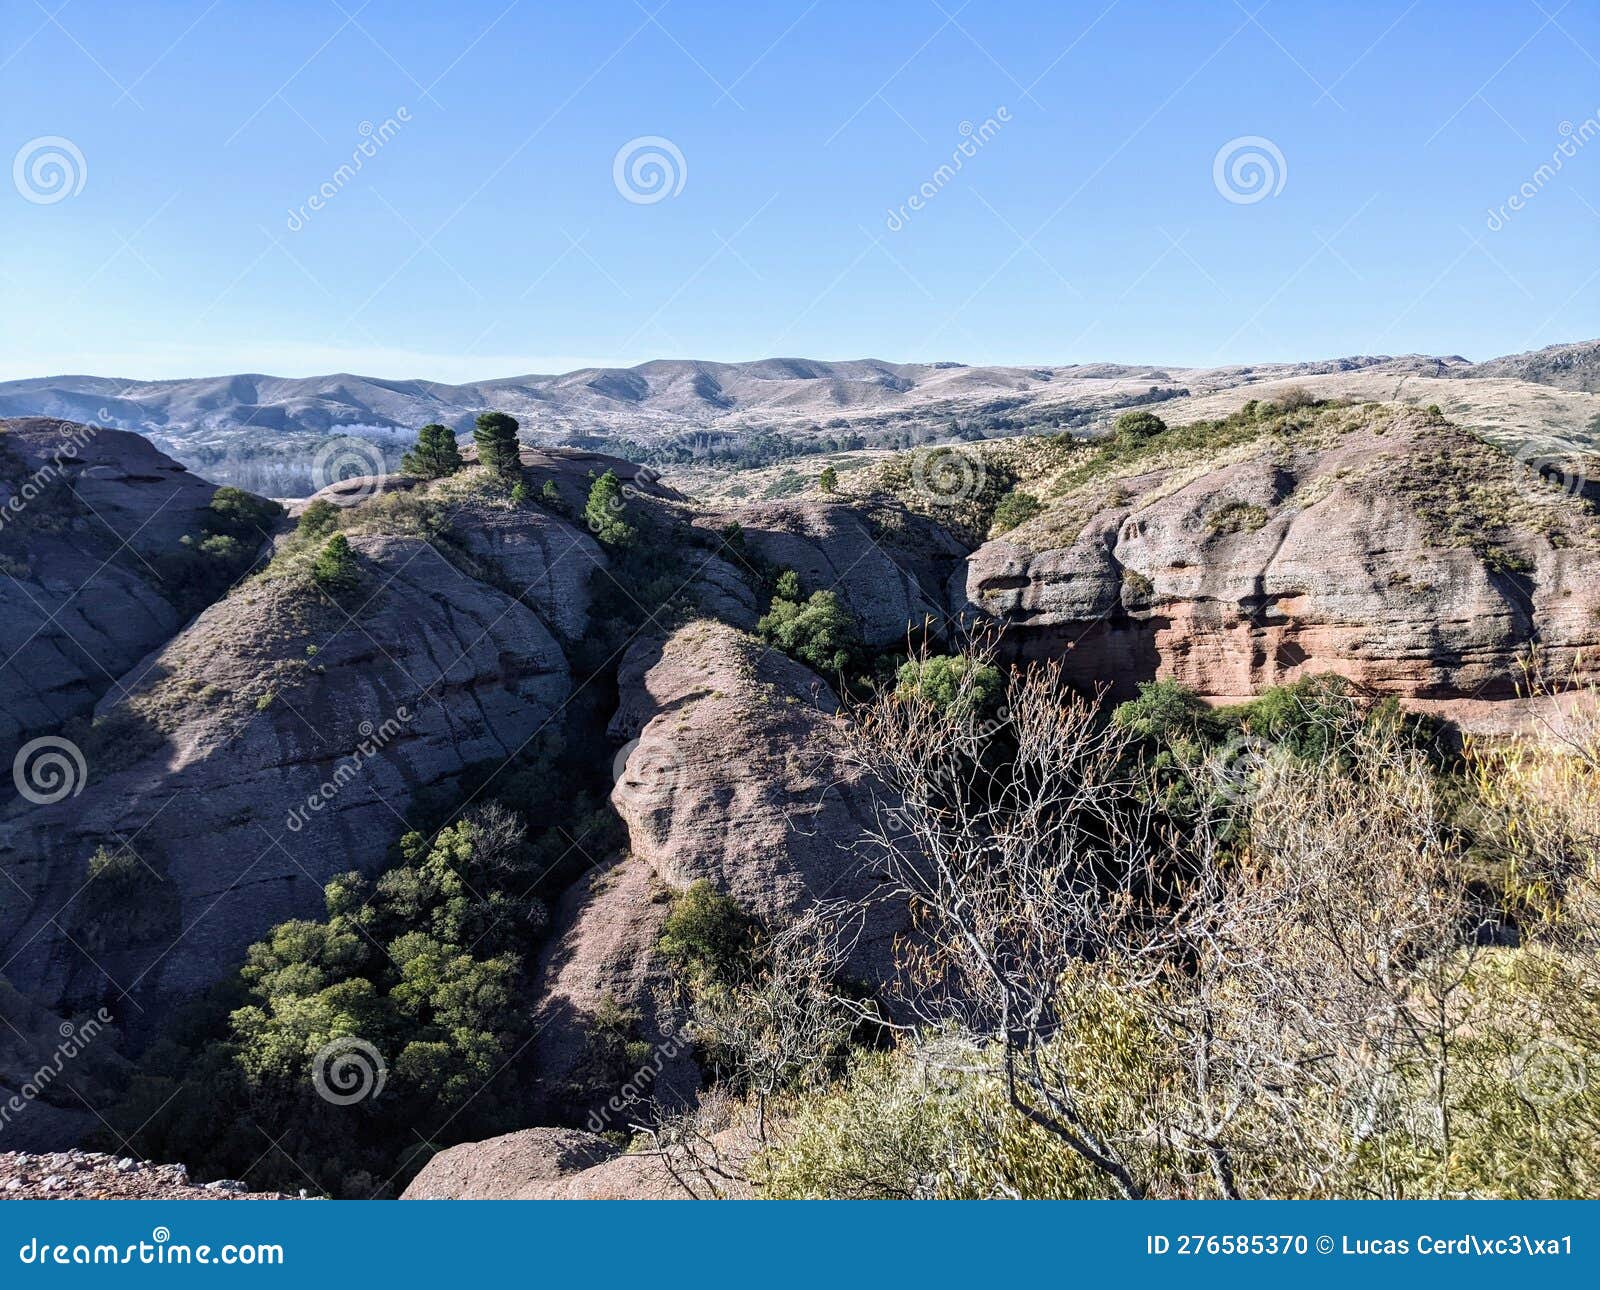 mountain landscapes of ongamira in the cordoba mountains, argentina